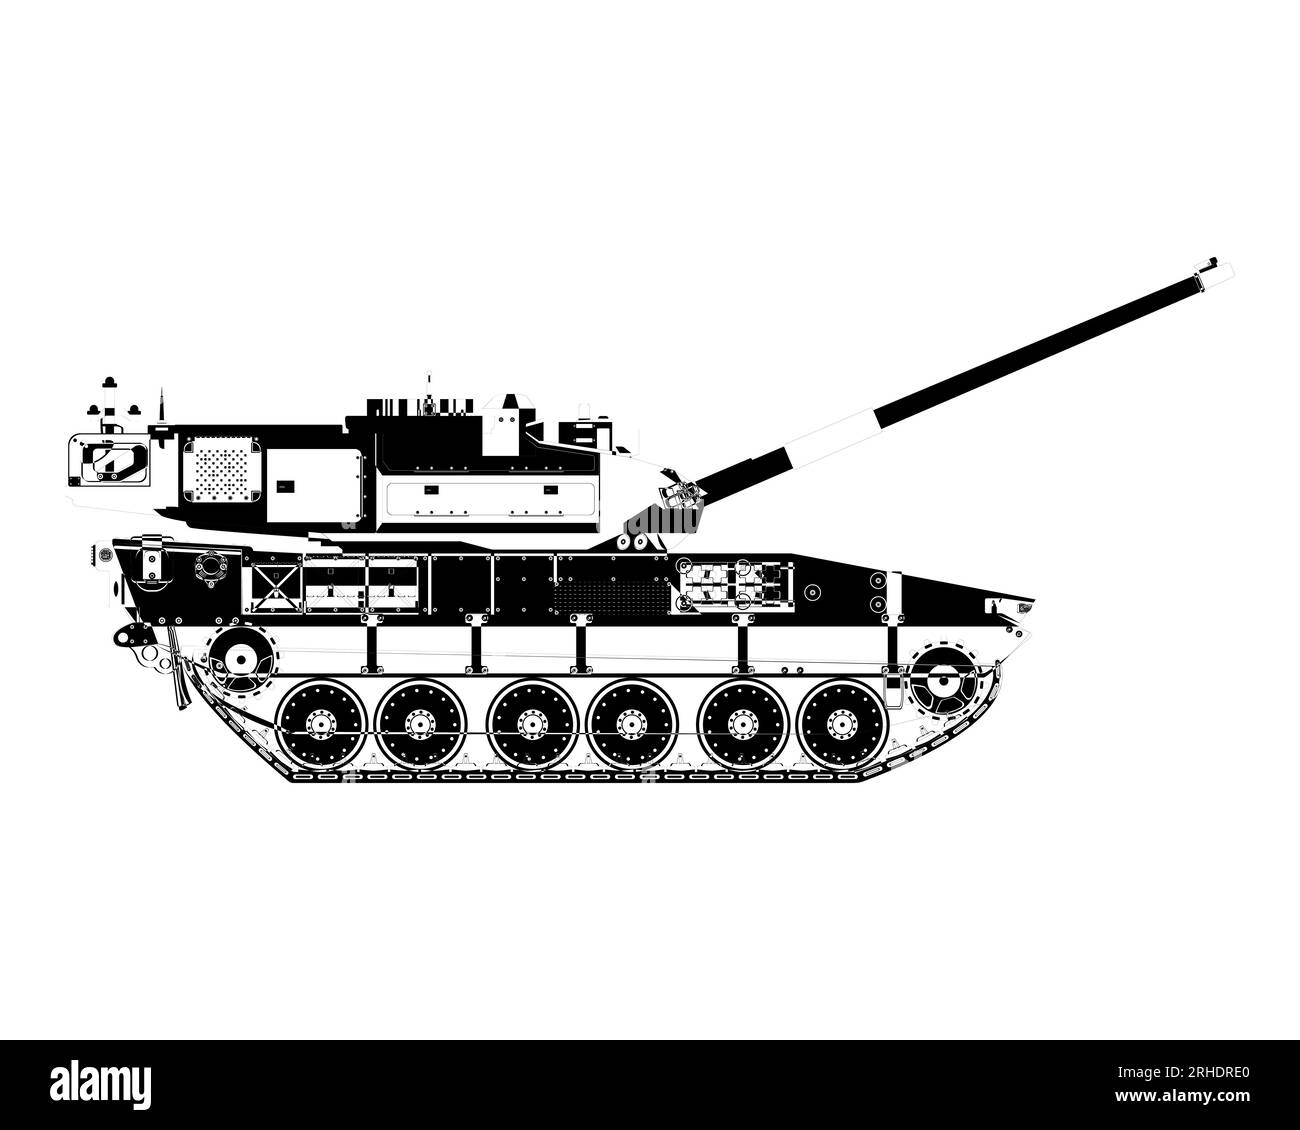 Main battle tank in abstract. Raised barrel. Armored military vehicle. Detailed vector illustration isolated on white background. Stock Vector